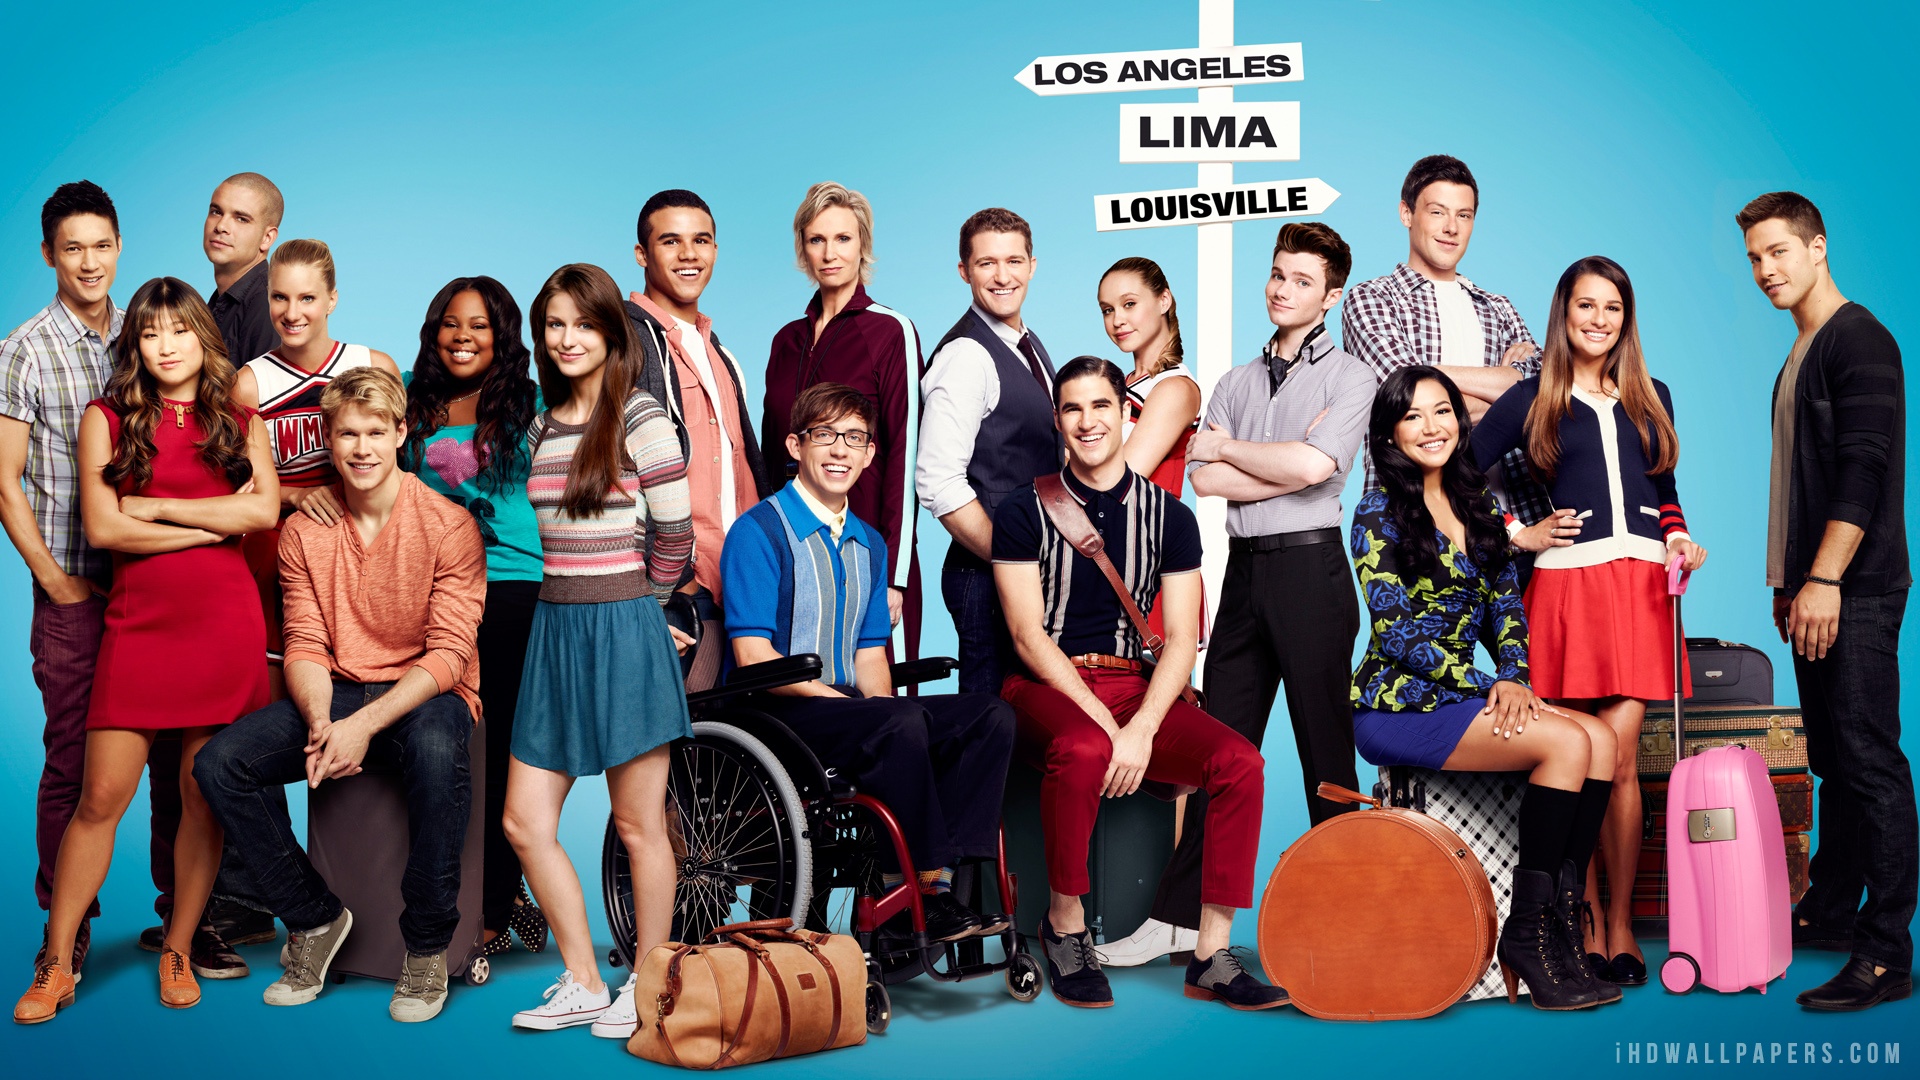 Free Download Glee Season 4 Hd Wallpaper Ihd Wallpapers 19x1080 For Your Desktop Mobile Tablet Explore 50 Glee Wallpaper For Ipad Apple Wallpaper For Iphone Apple Wallpapers For Ipad